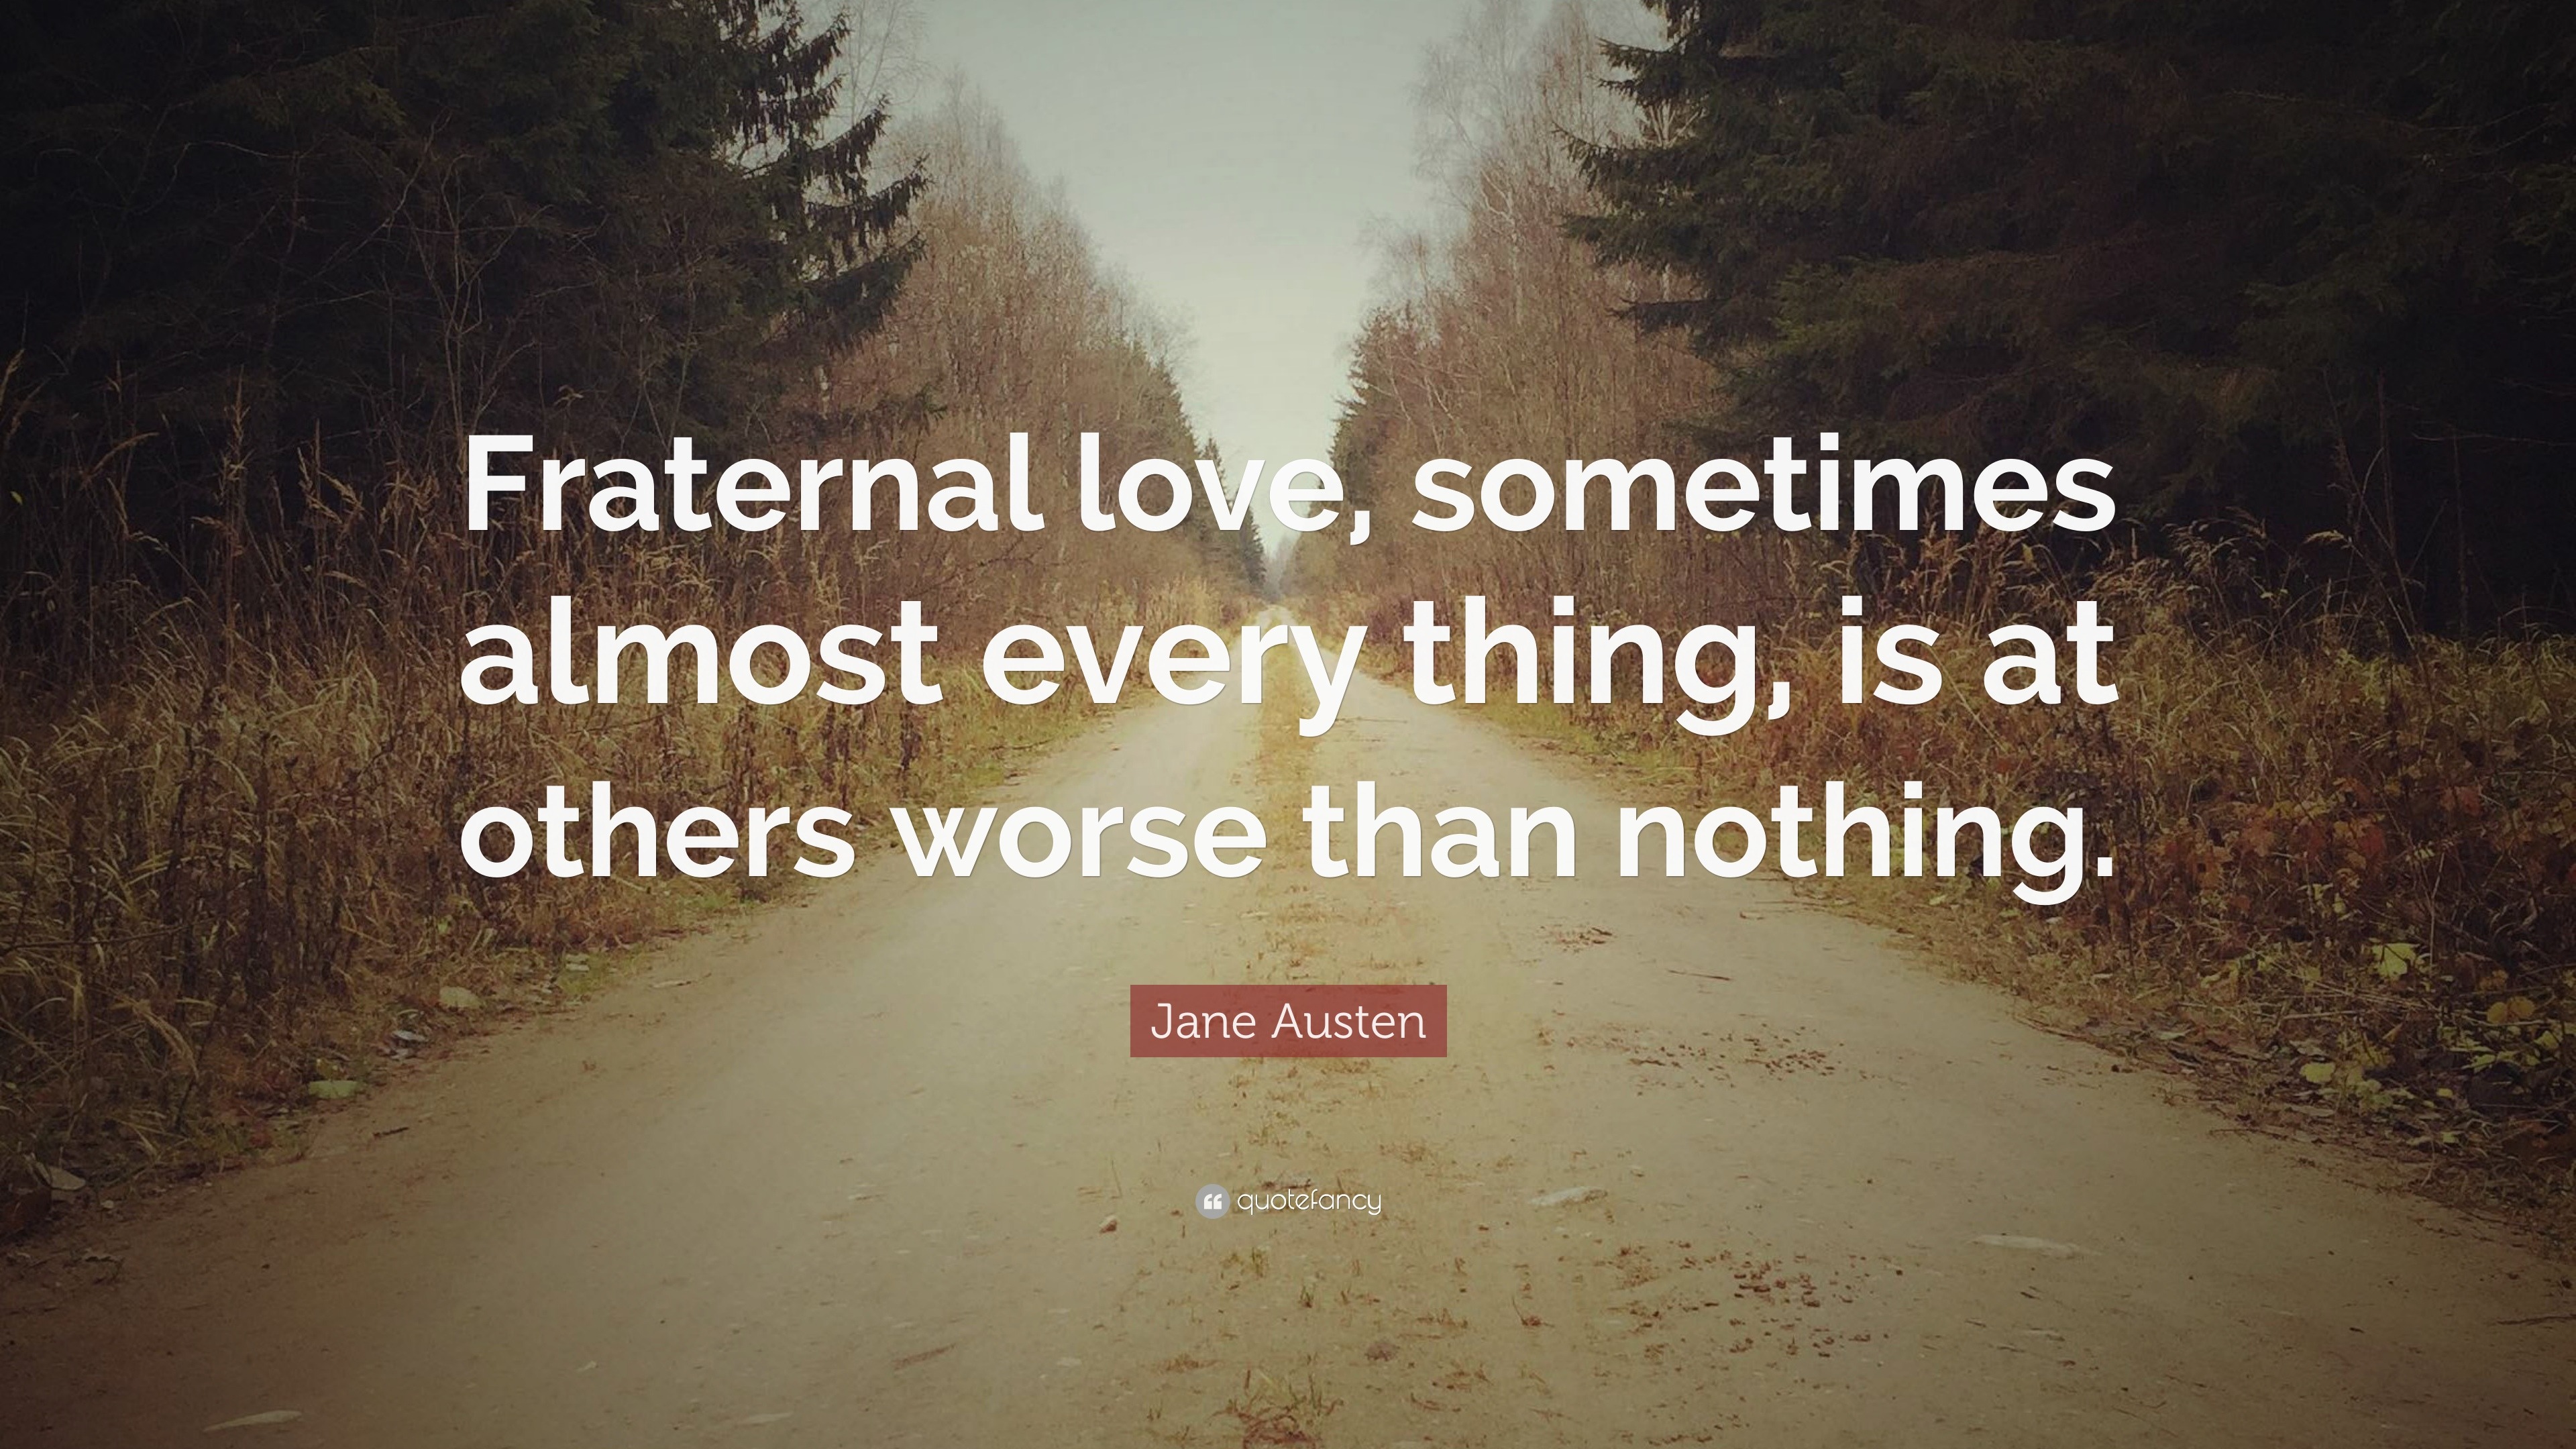 Jane Austen Quote: “Fraternal love, sometimes almost every thing, is at